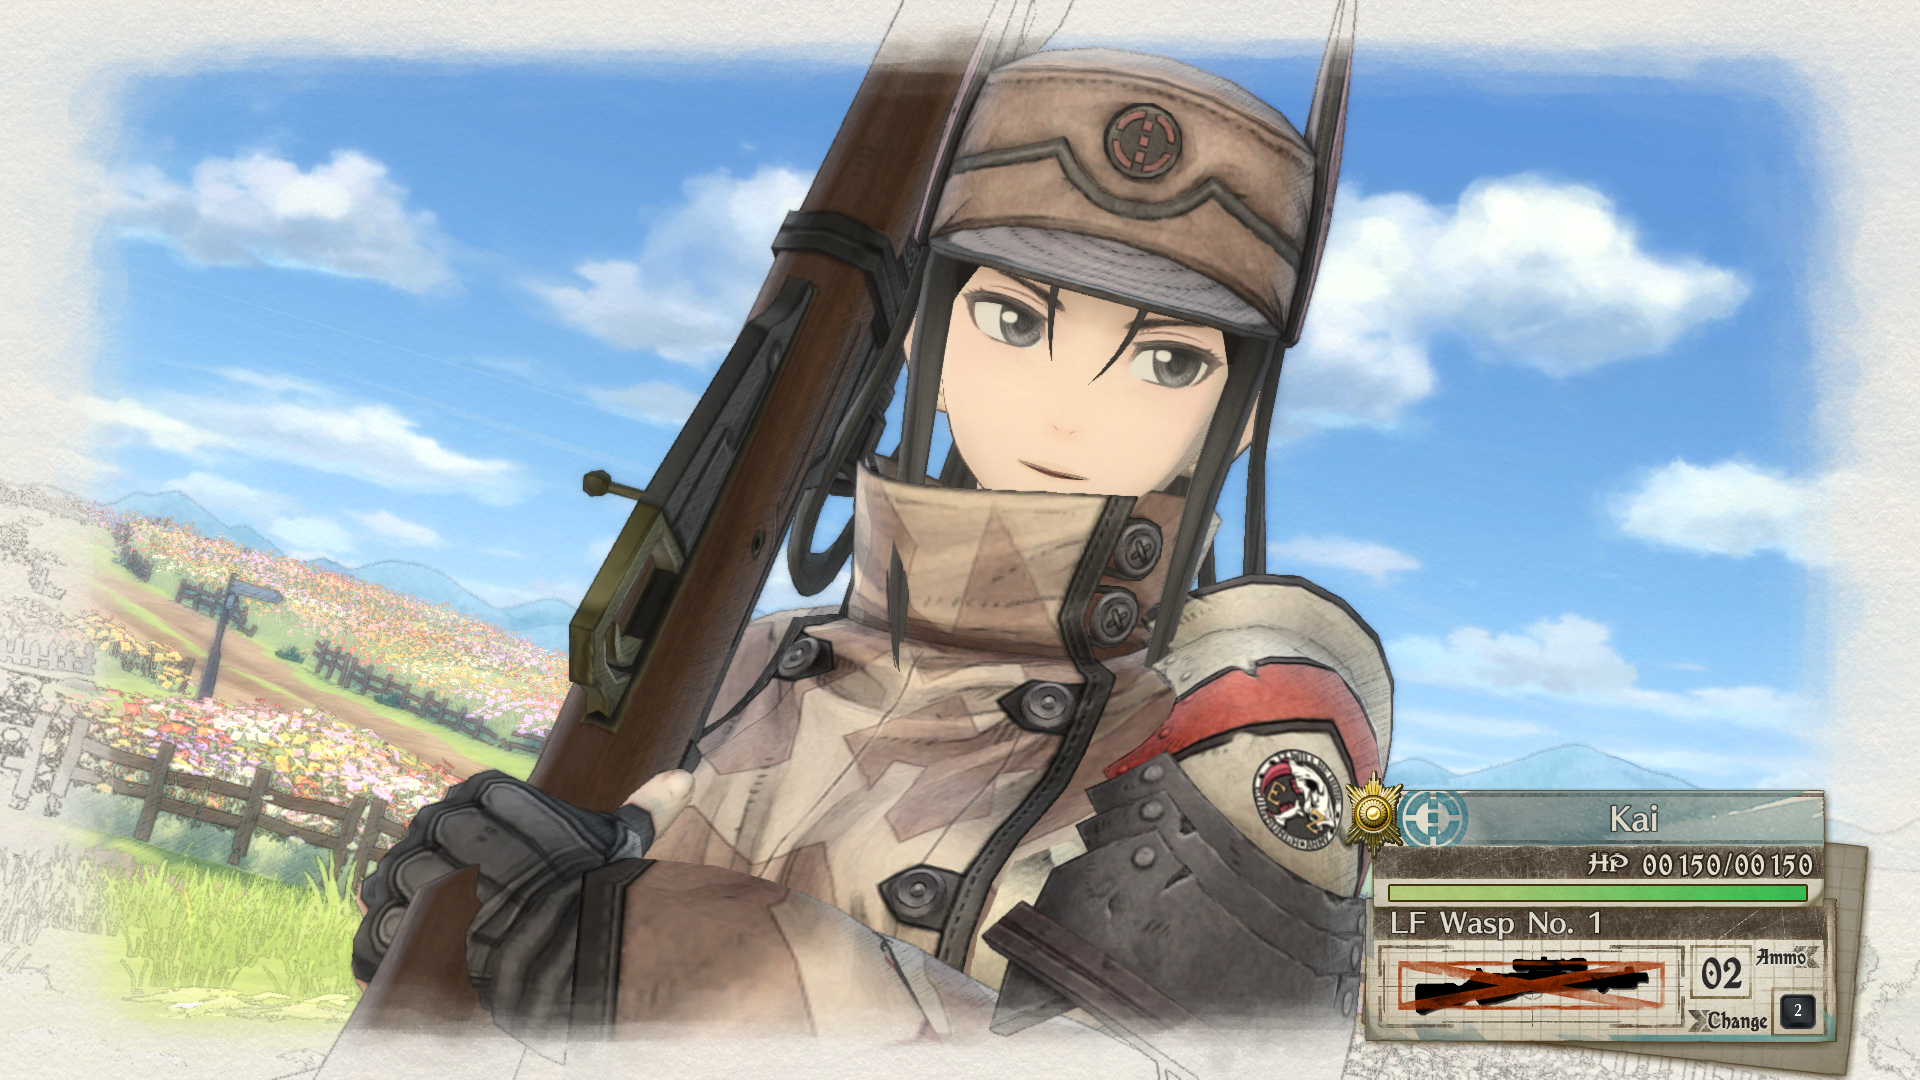 Valkyria Chronicles 4 — Complete Edition